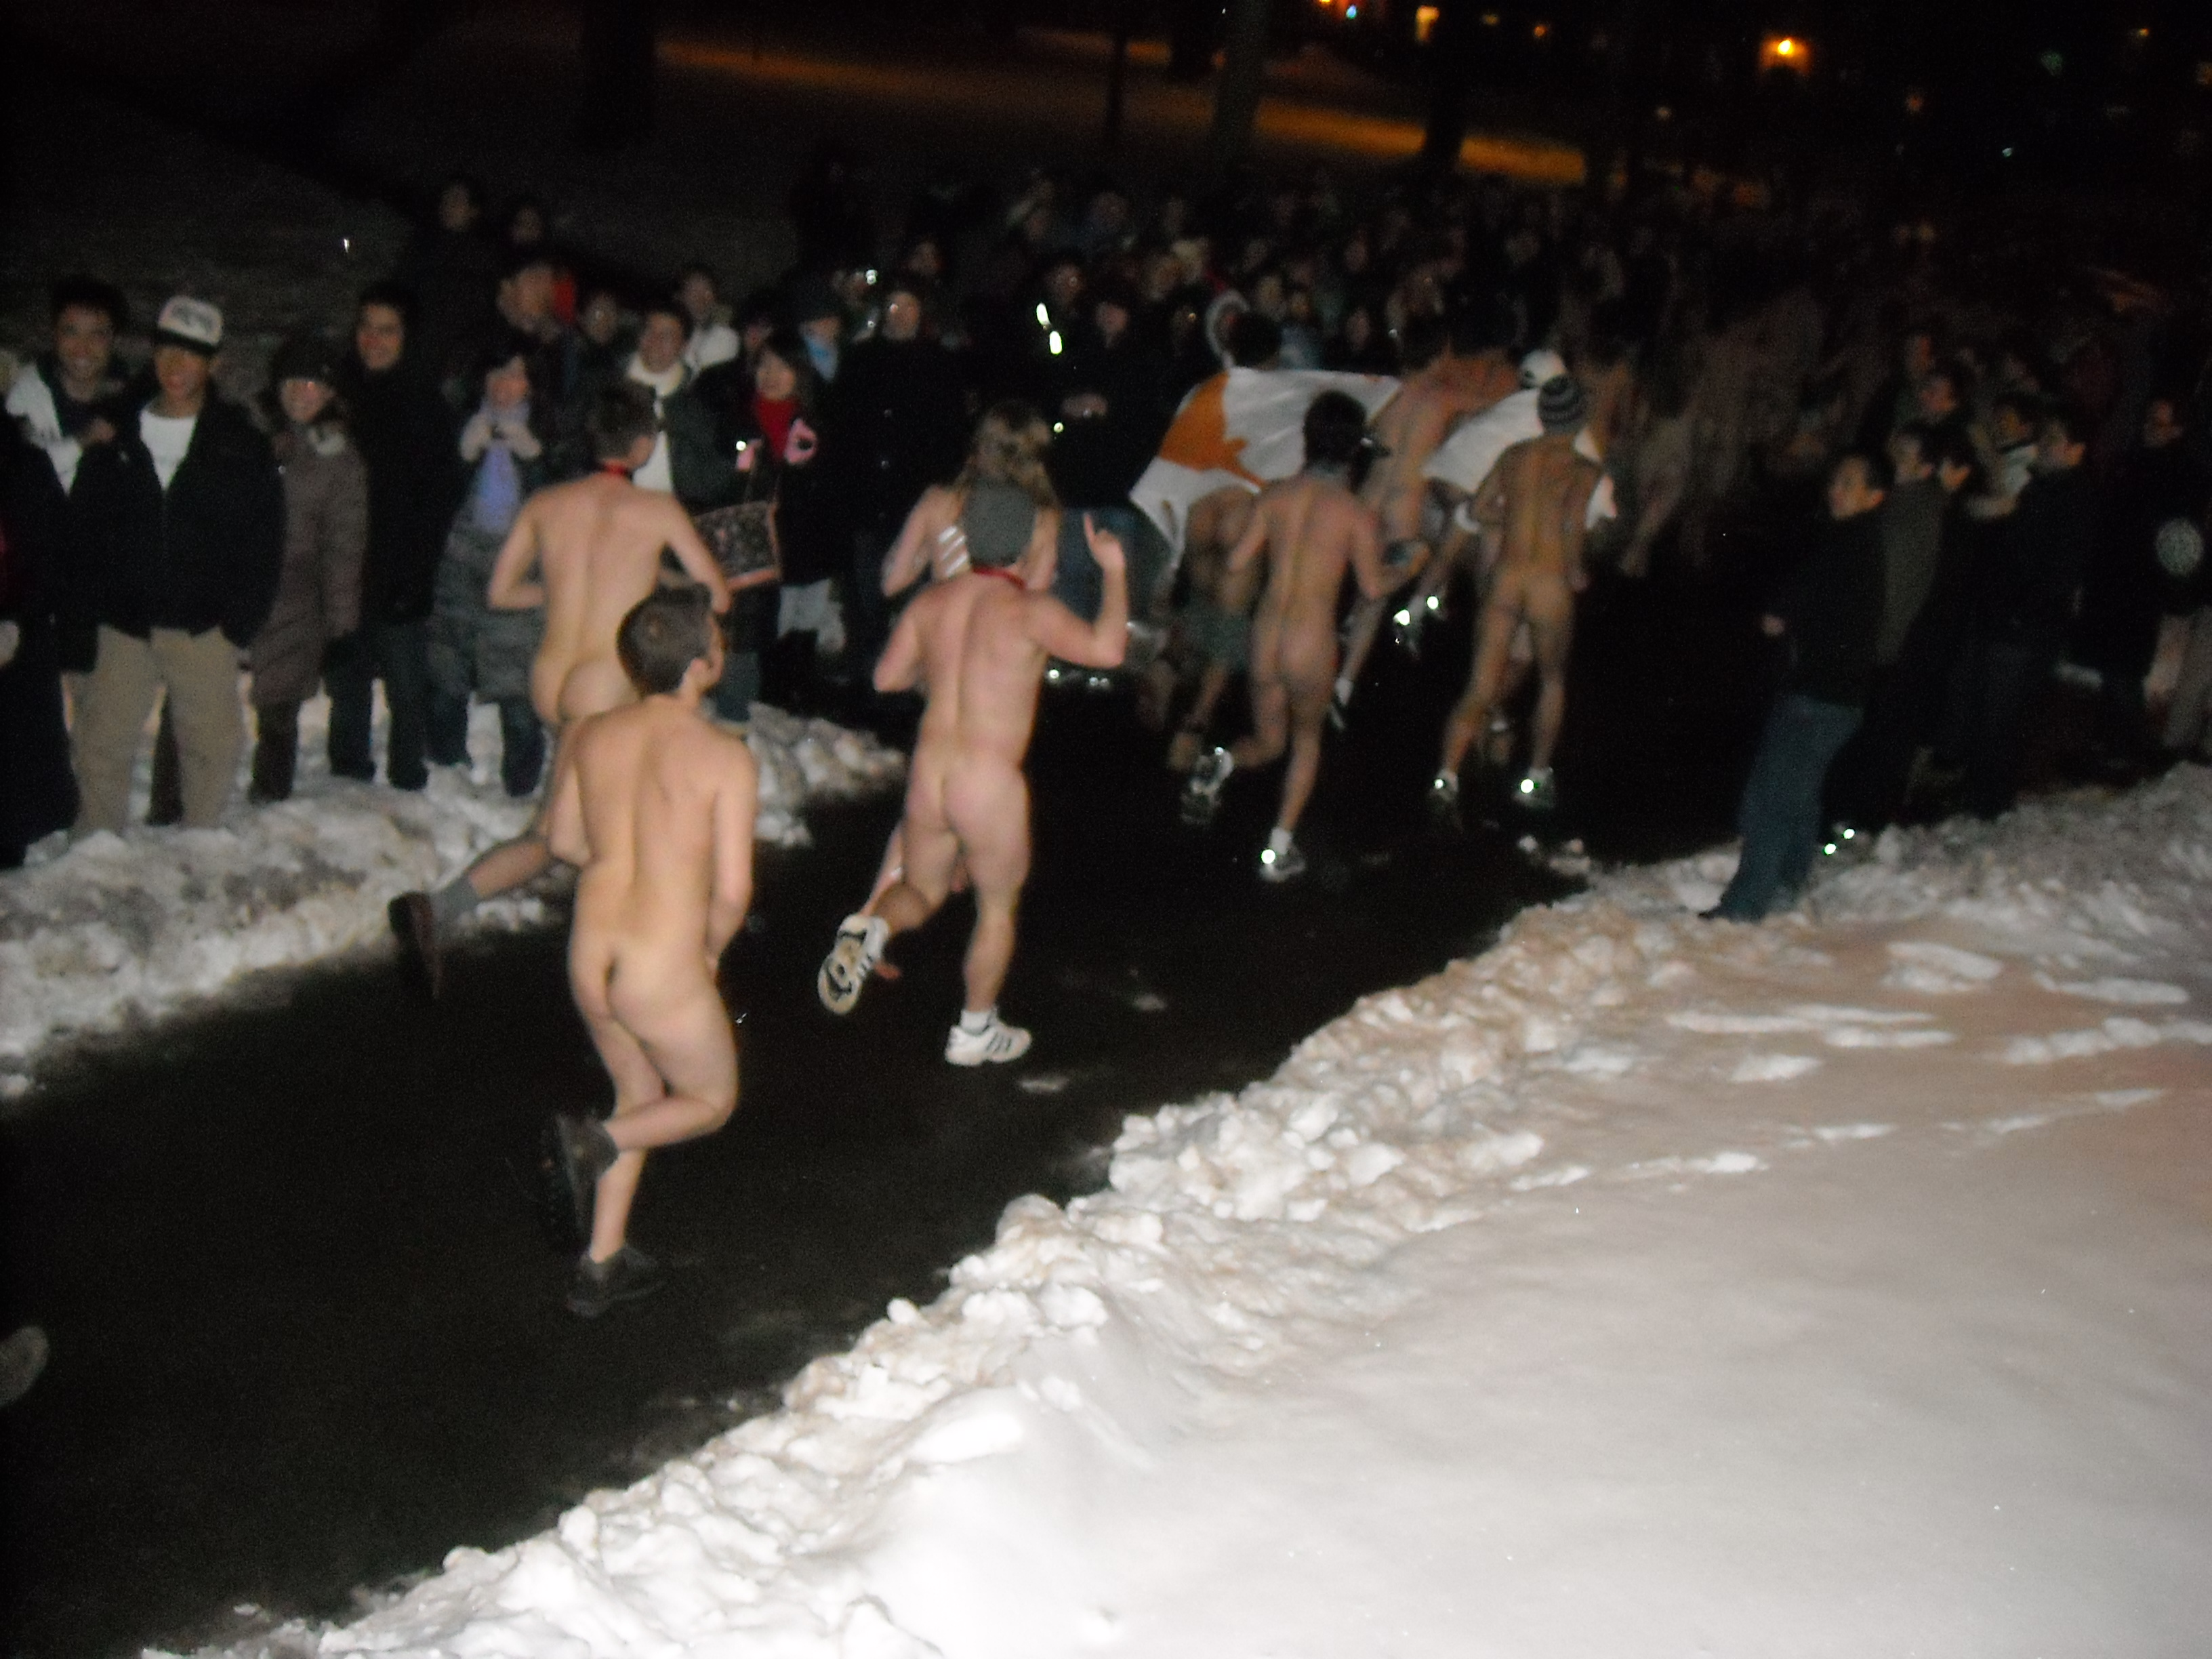 quot; Last night at midnight was the annual Harvard tradition called Primal ...